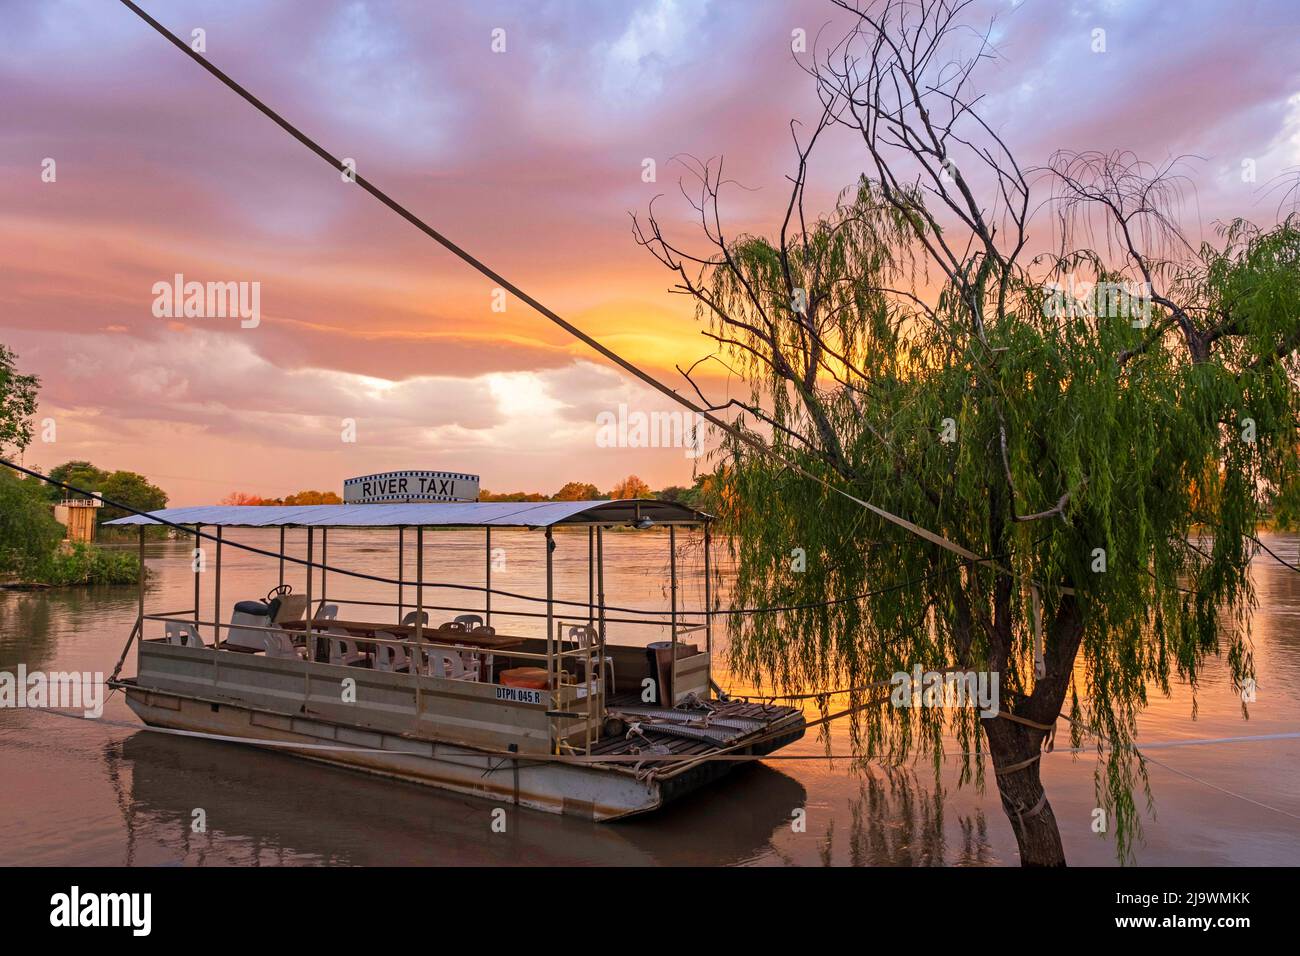 River taxi boat on the Orange river at sunset near Upington, Northern Cape province, South Africa Stock Photo